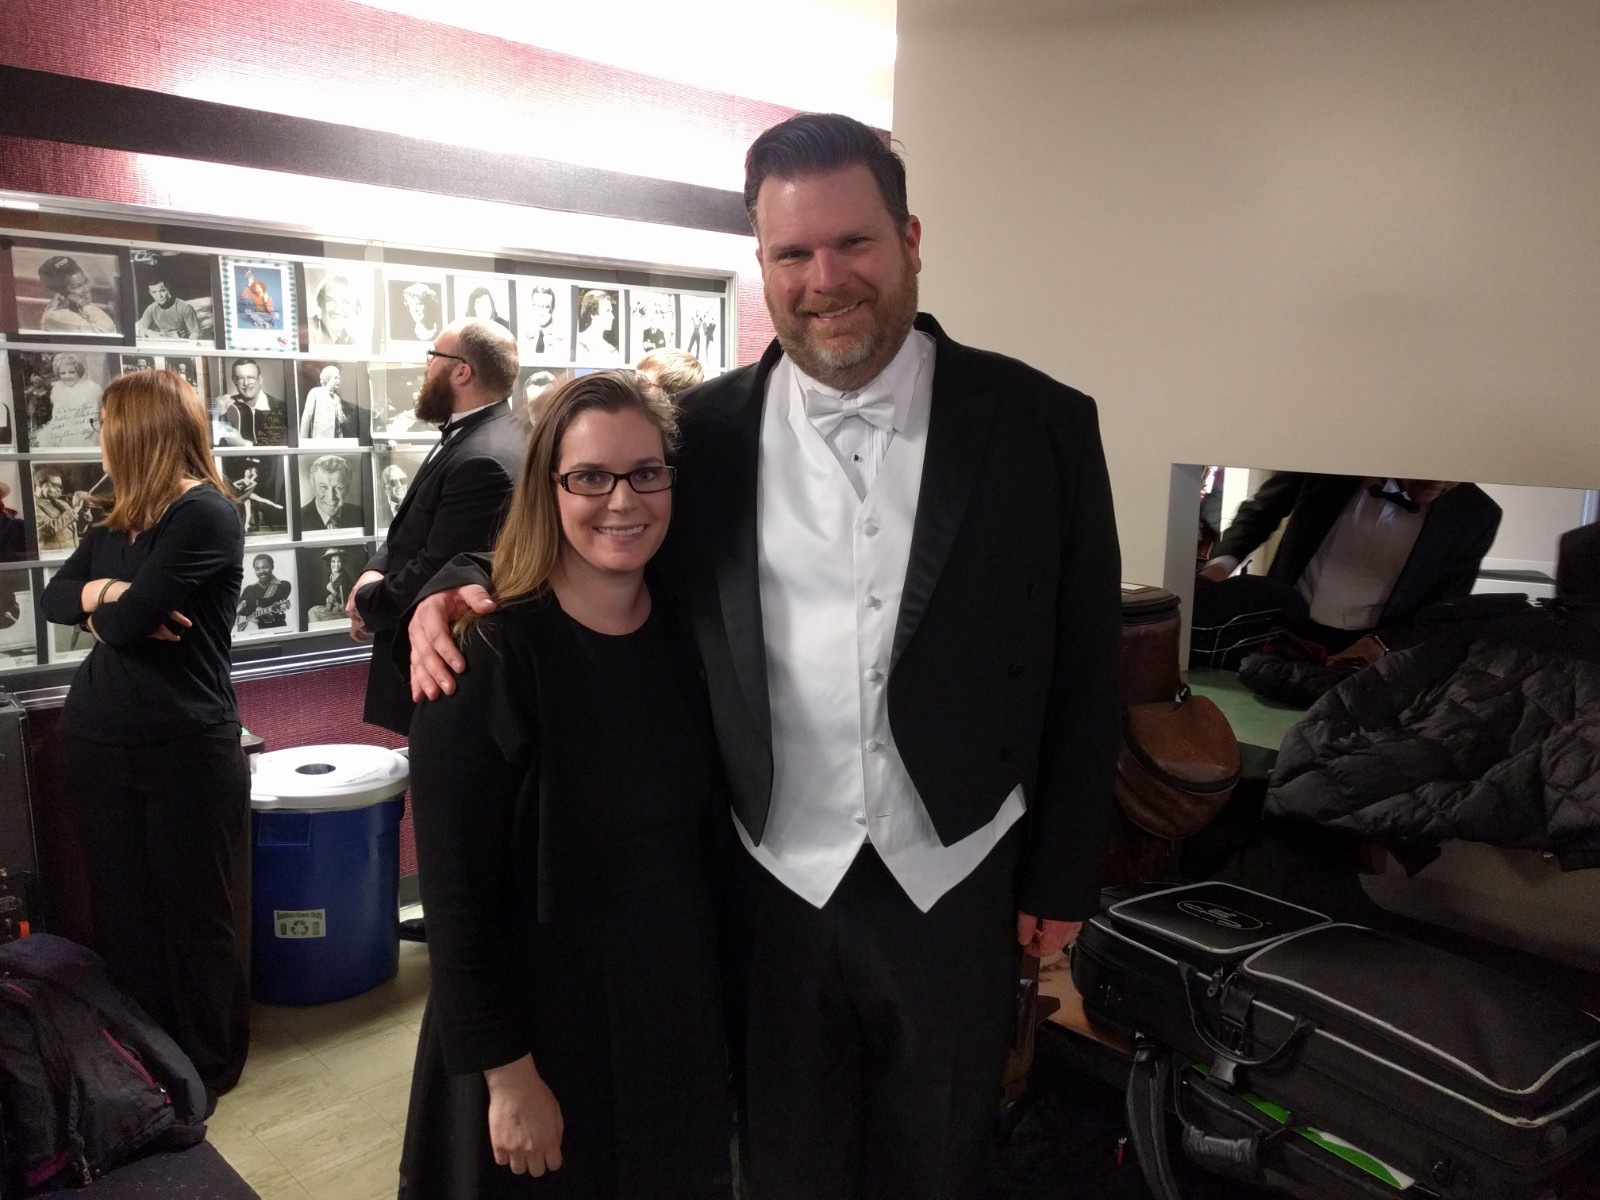 CBDNA North Central Conference 2018, Joni and director of IU Symphonic Band, Eric Smedley
